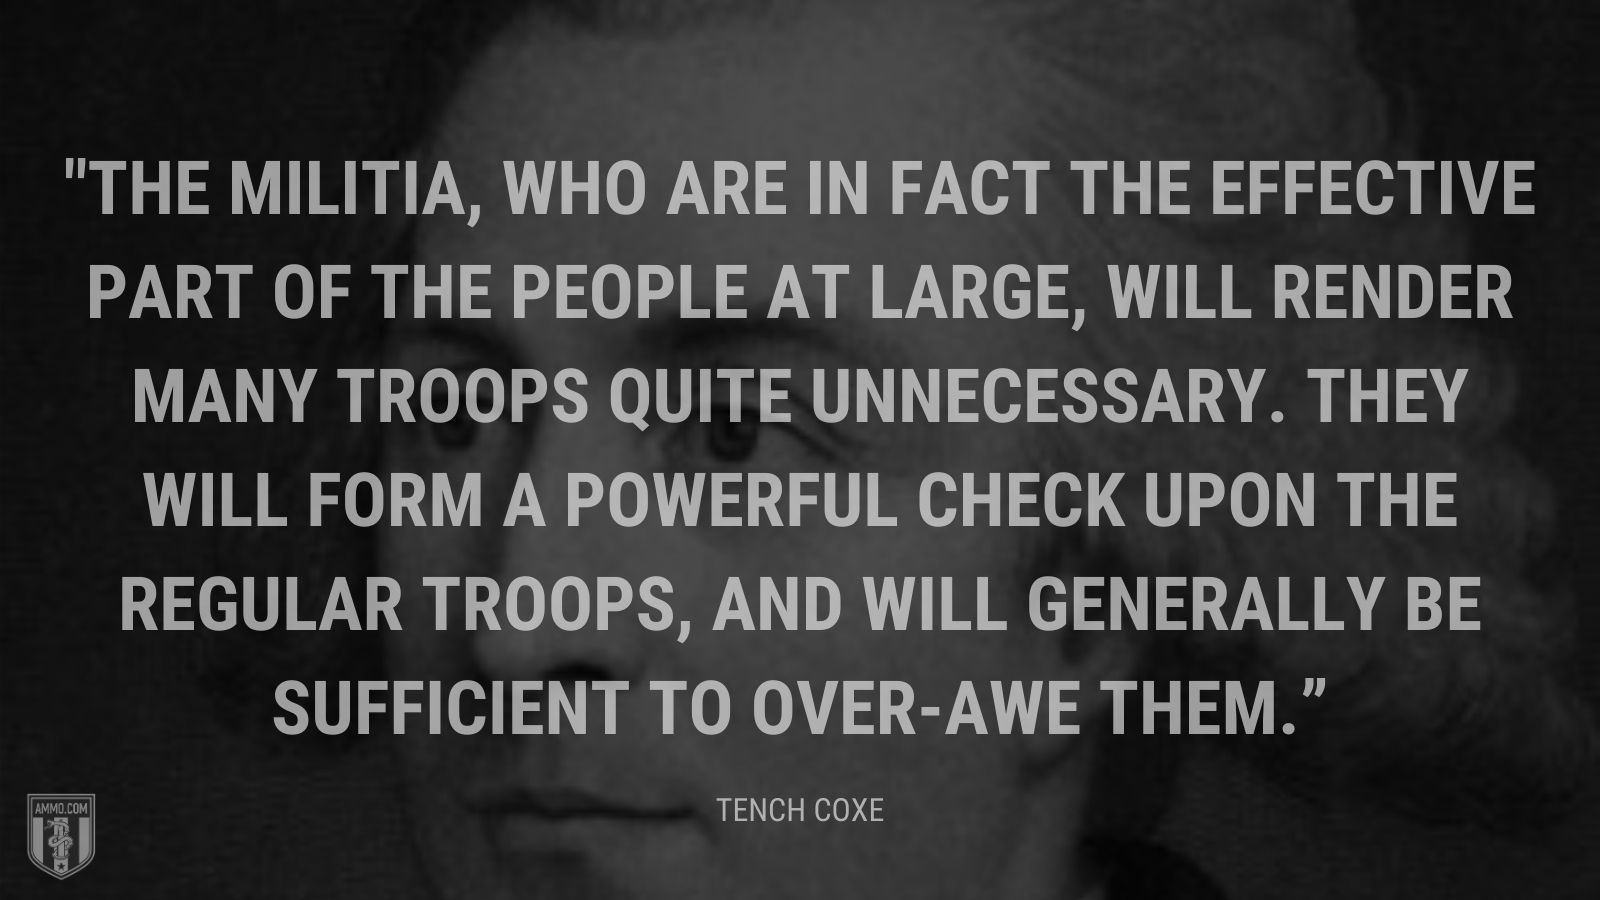 “The militia, who are in fact the effective part of the people at large, will render many troops quite unnecessary. They will form a powerful check upon the regular troops, and will generally be sufficient to over-awe them.” - Tench Coxe